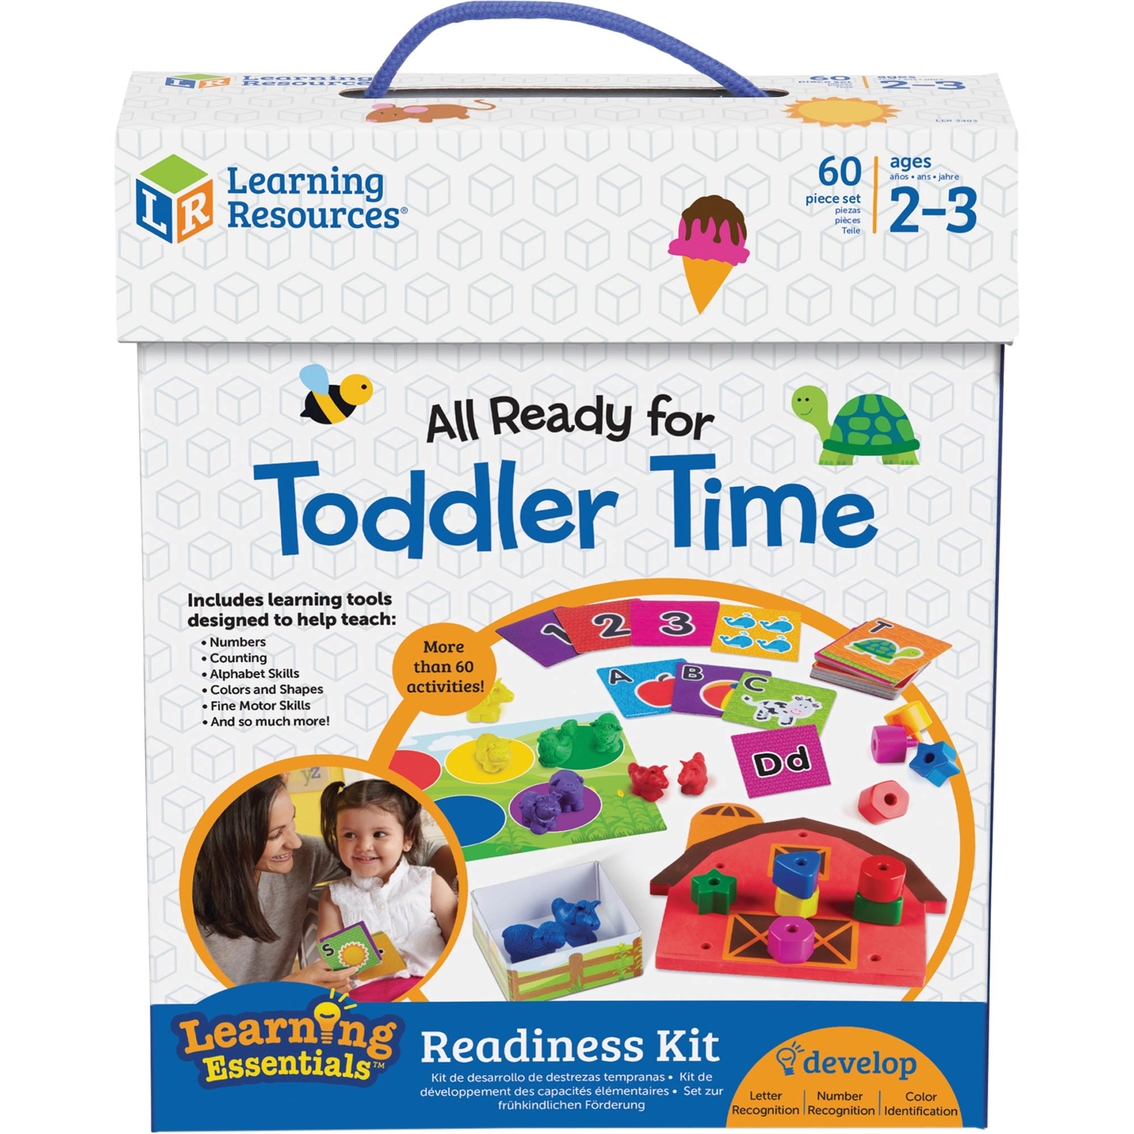 Learning Resources All Ready for Toddler Time Readiness Kit - Image 1 of 3